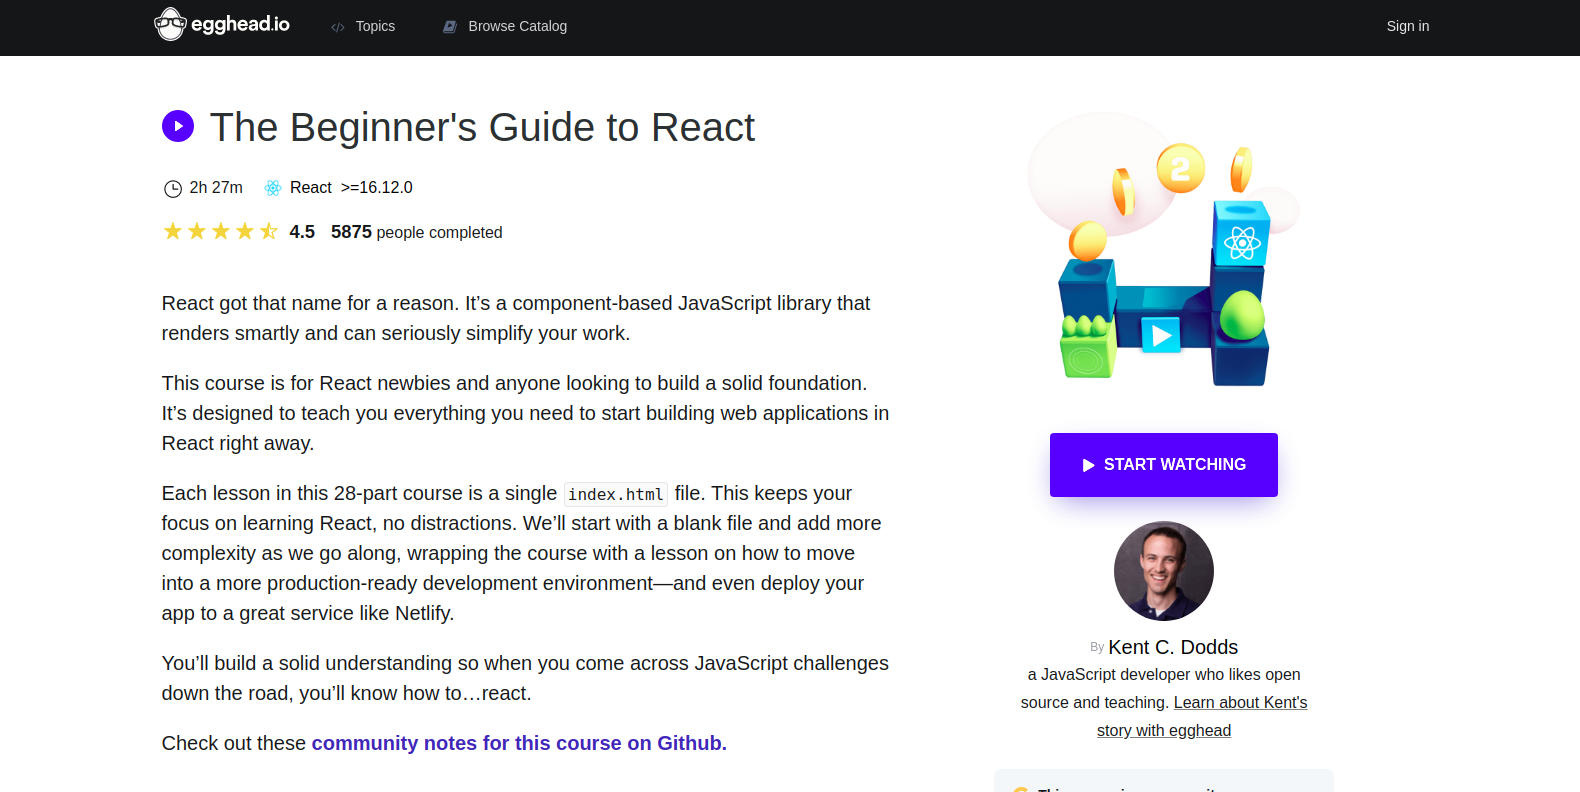 The Beginner's Guide to React intro page